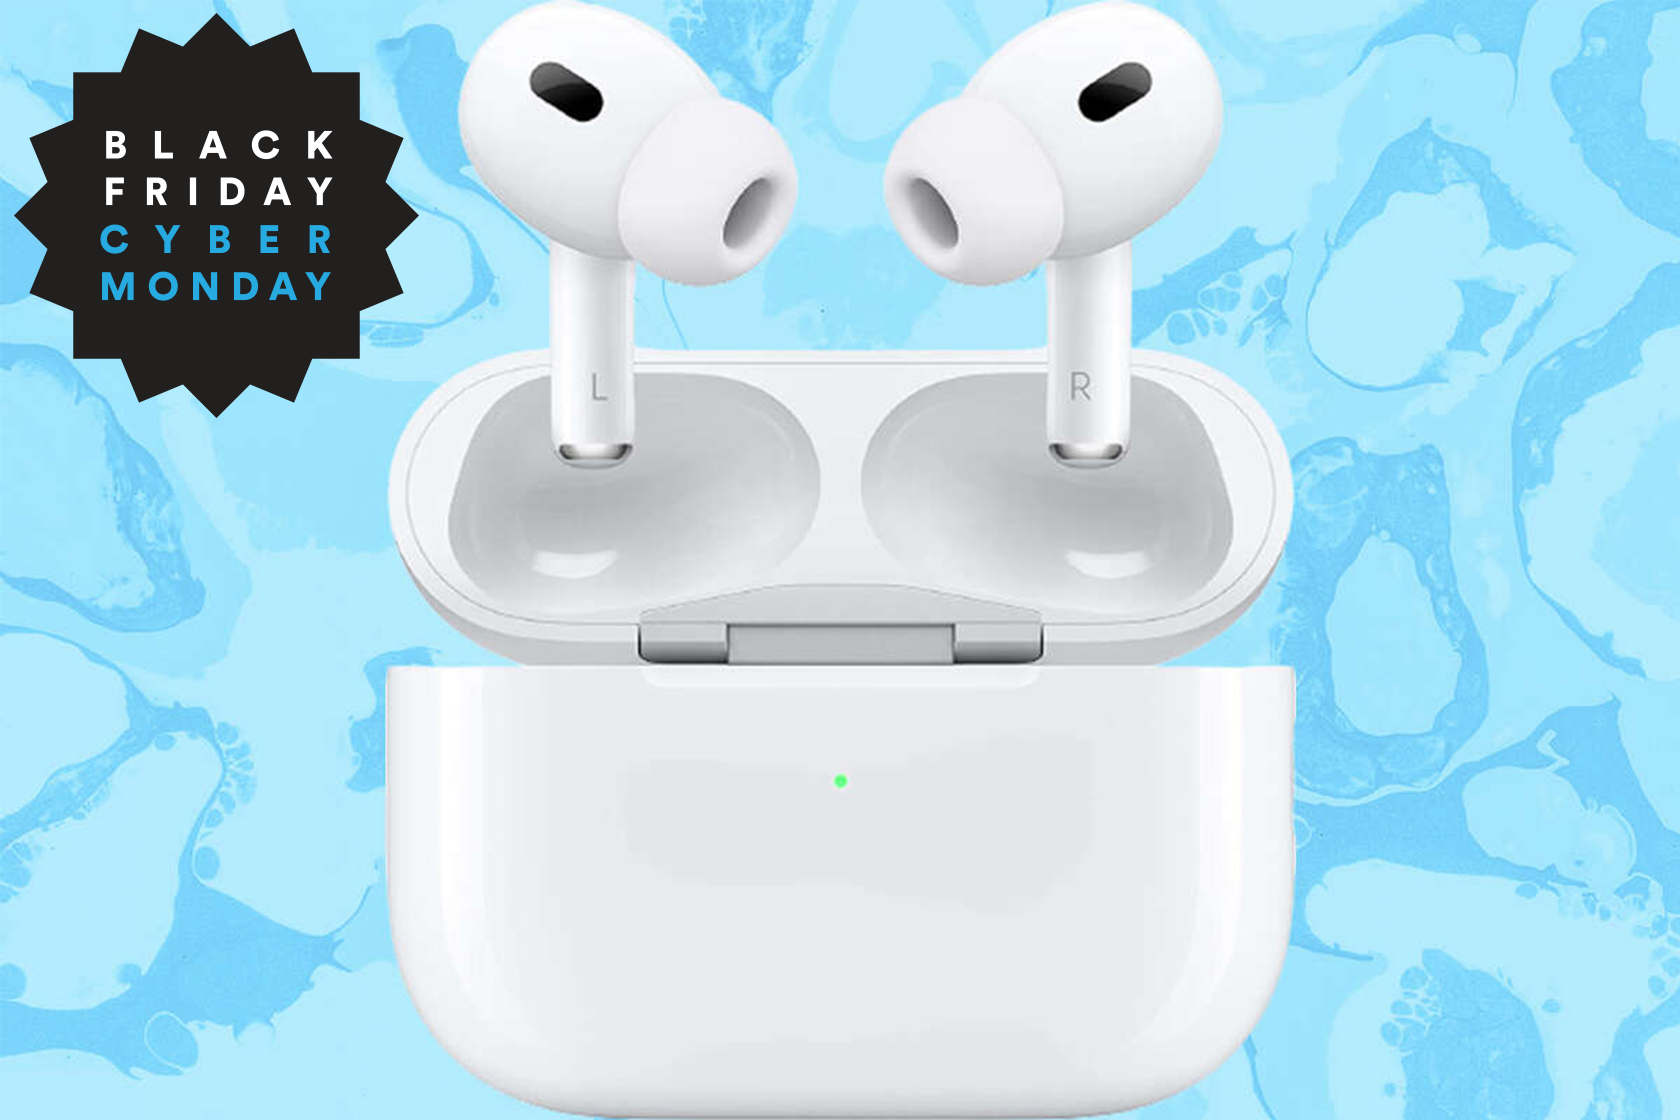 Mægtig Gutter brændstof Apple AirPods Pro 2 marked down to lowest price ever on Amazon